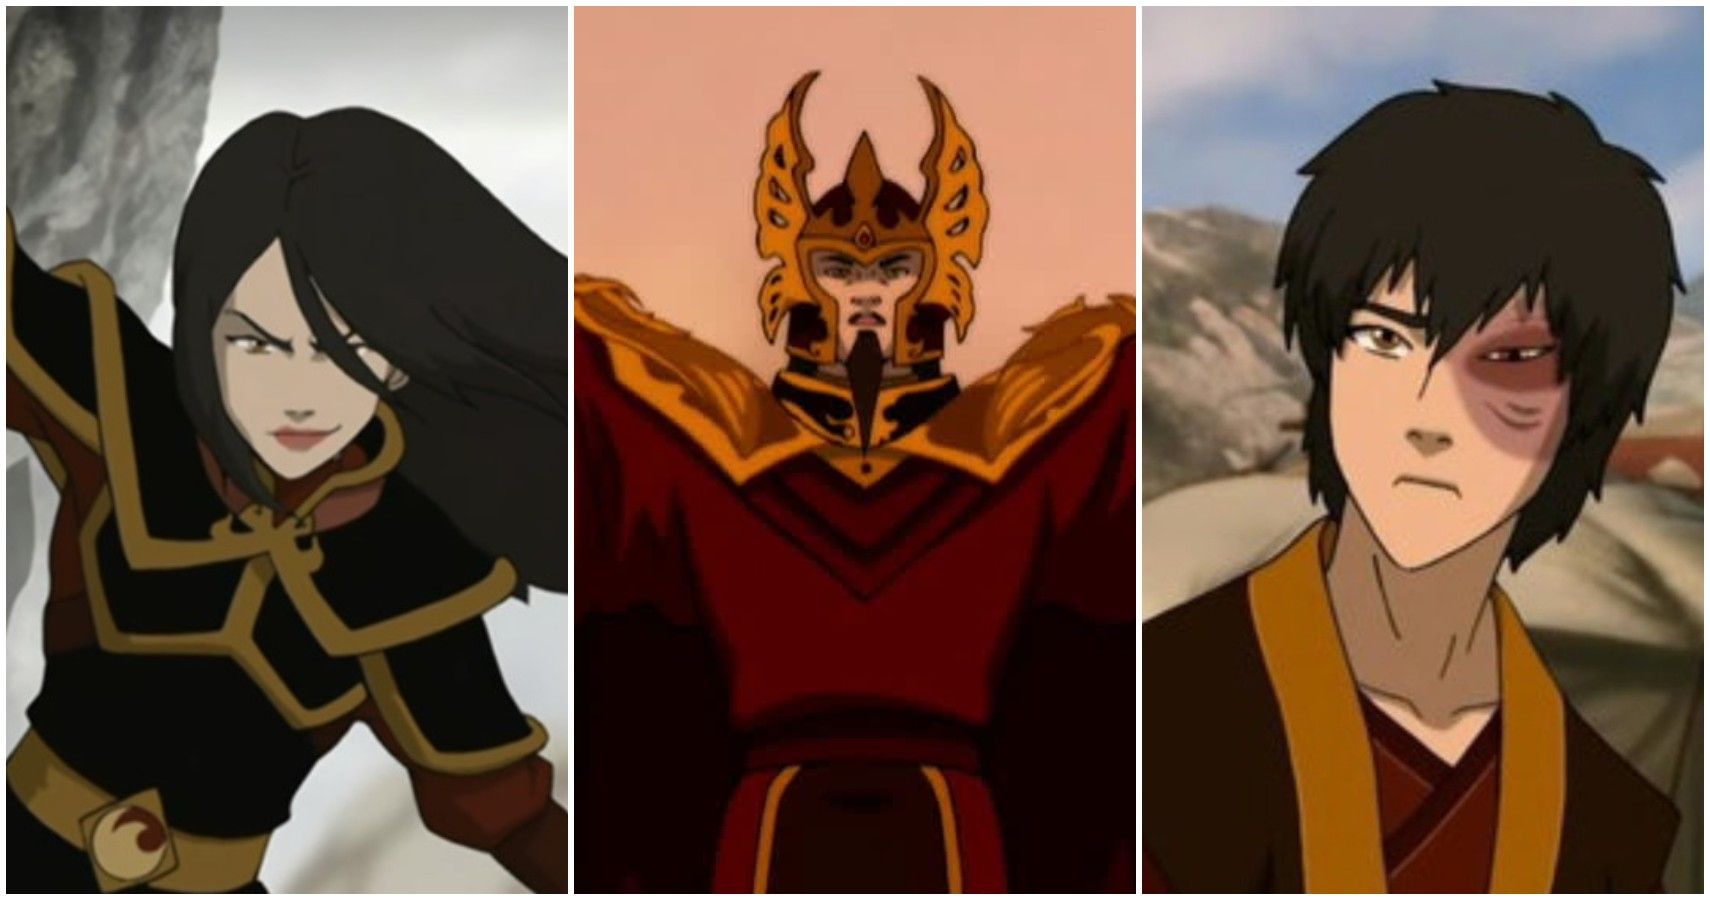 NickALive Avatar The Last Airbender Shares First Look at Fire Nation  Princess Zeisan